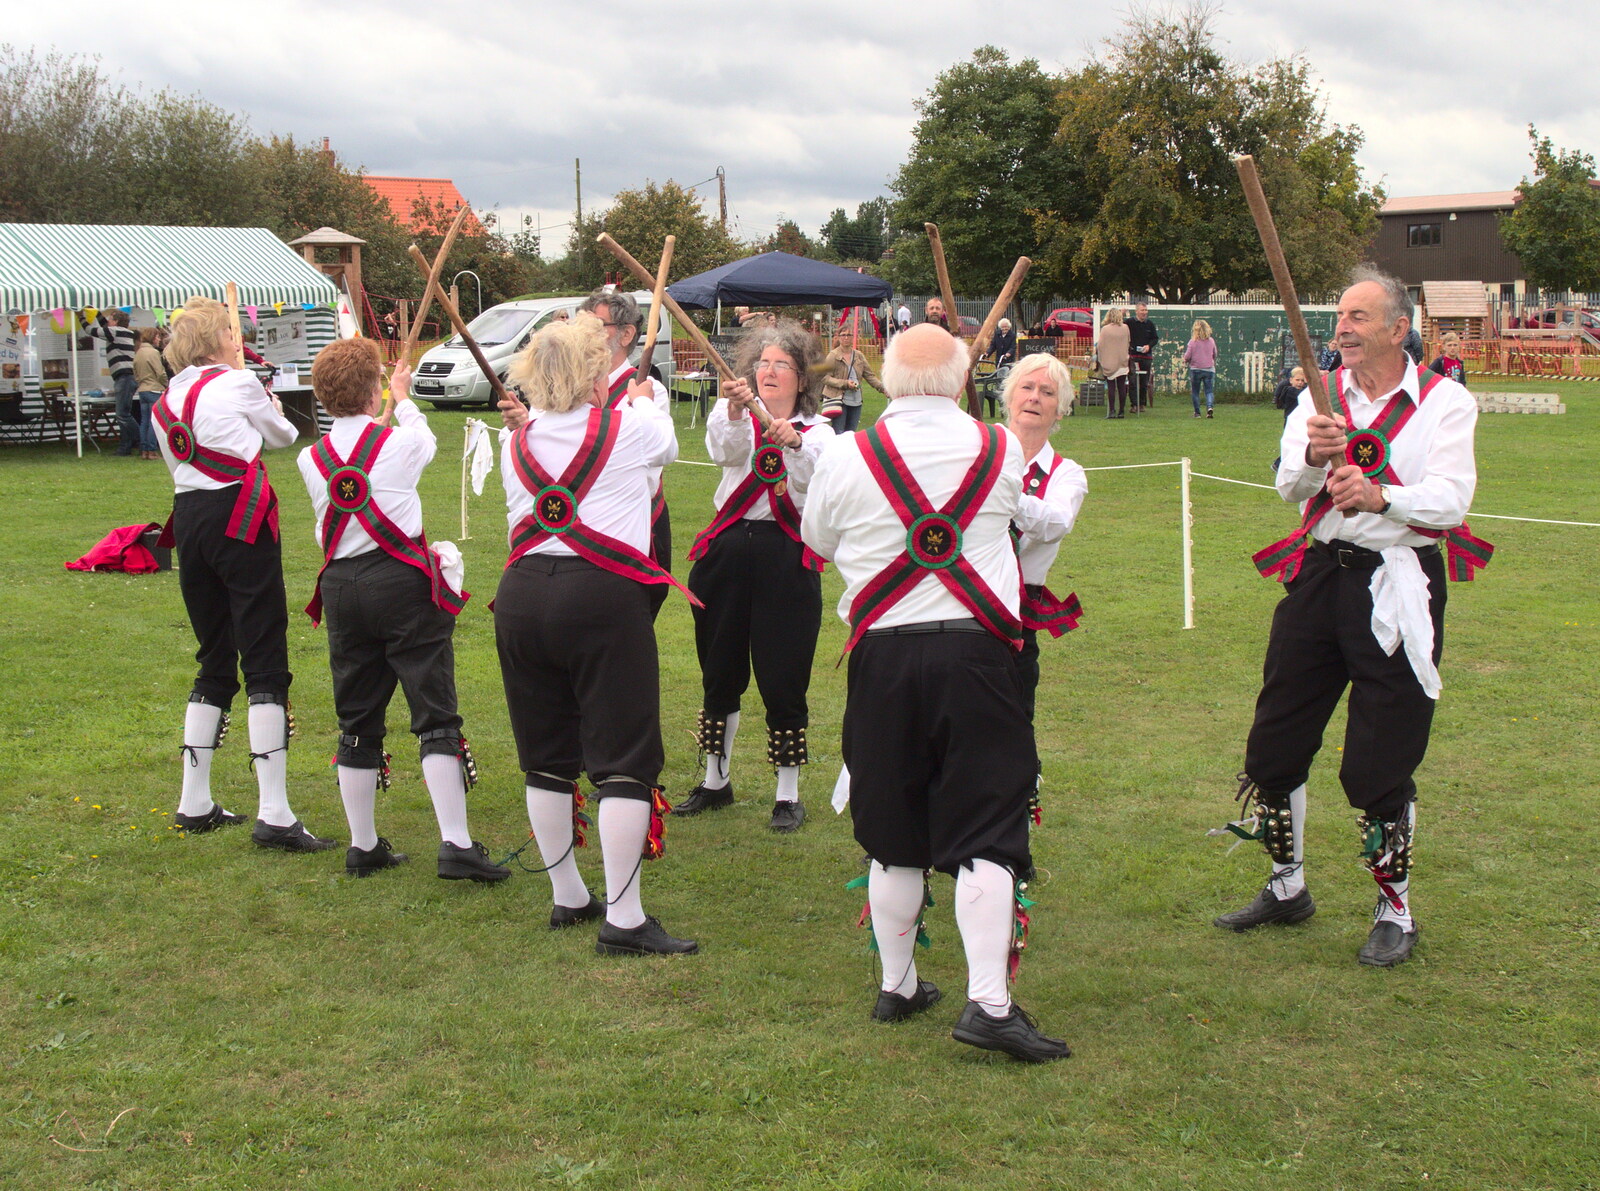 The Hoxon Hundred get their sticks out from A Summer Fete, Palgrave, Suffolk - 10th September 2017